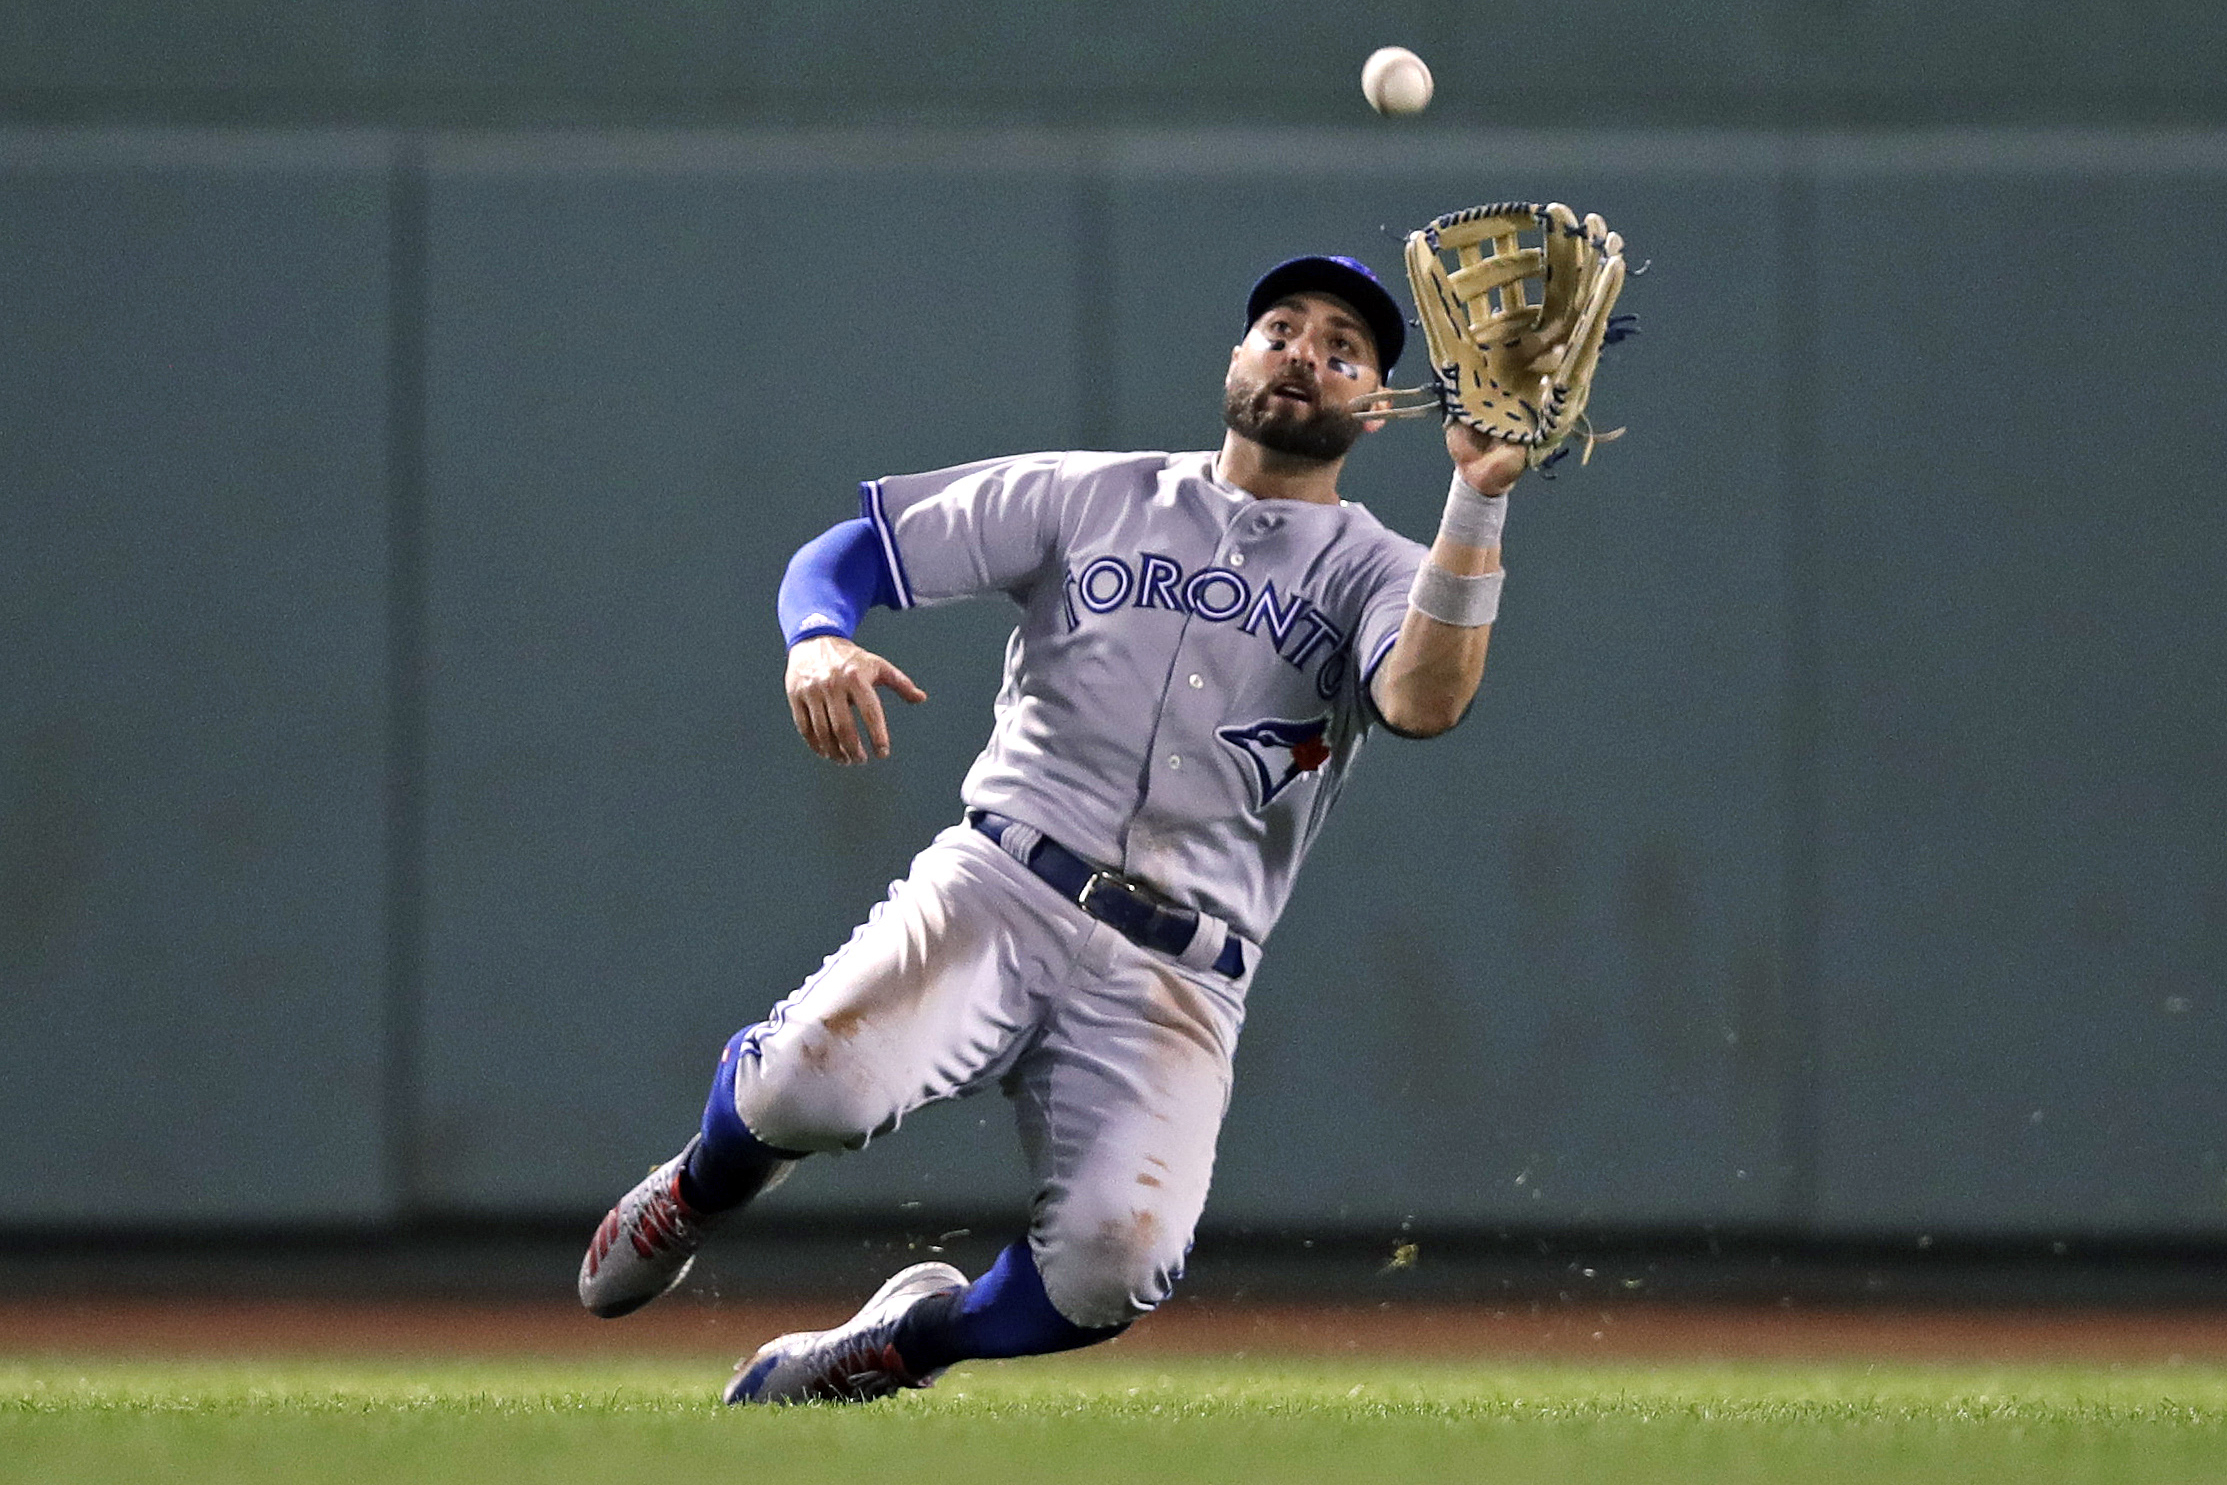 Giants acquire Kevin Pillar from Blue Jays - NBC Sports